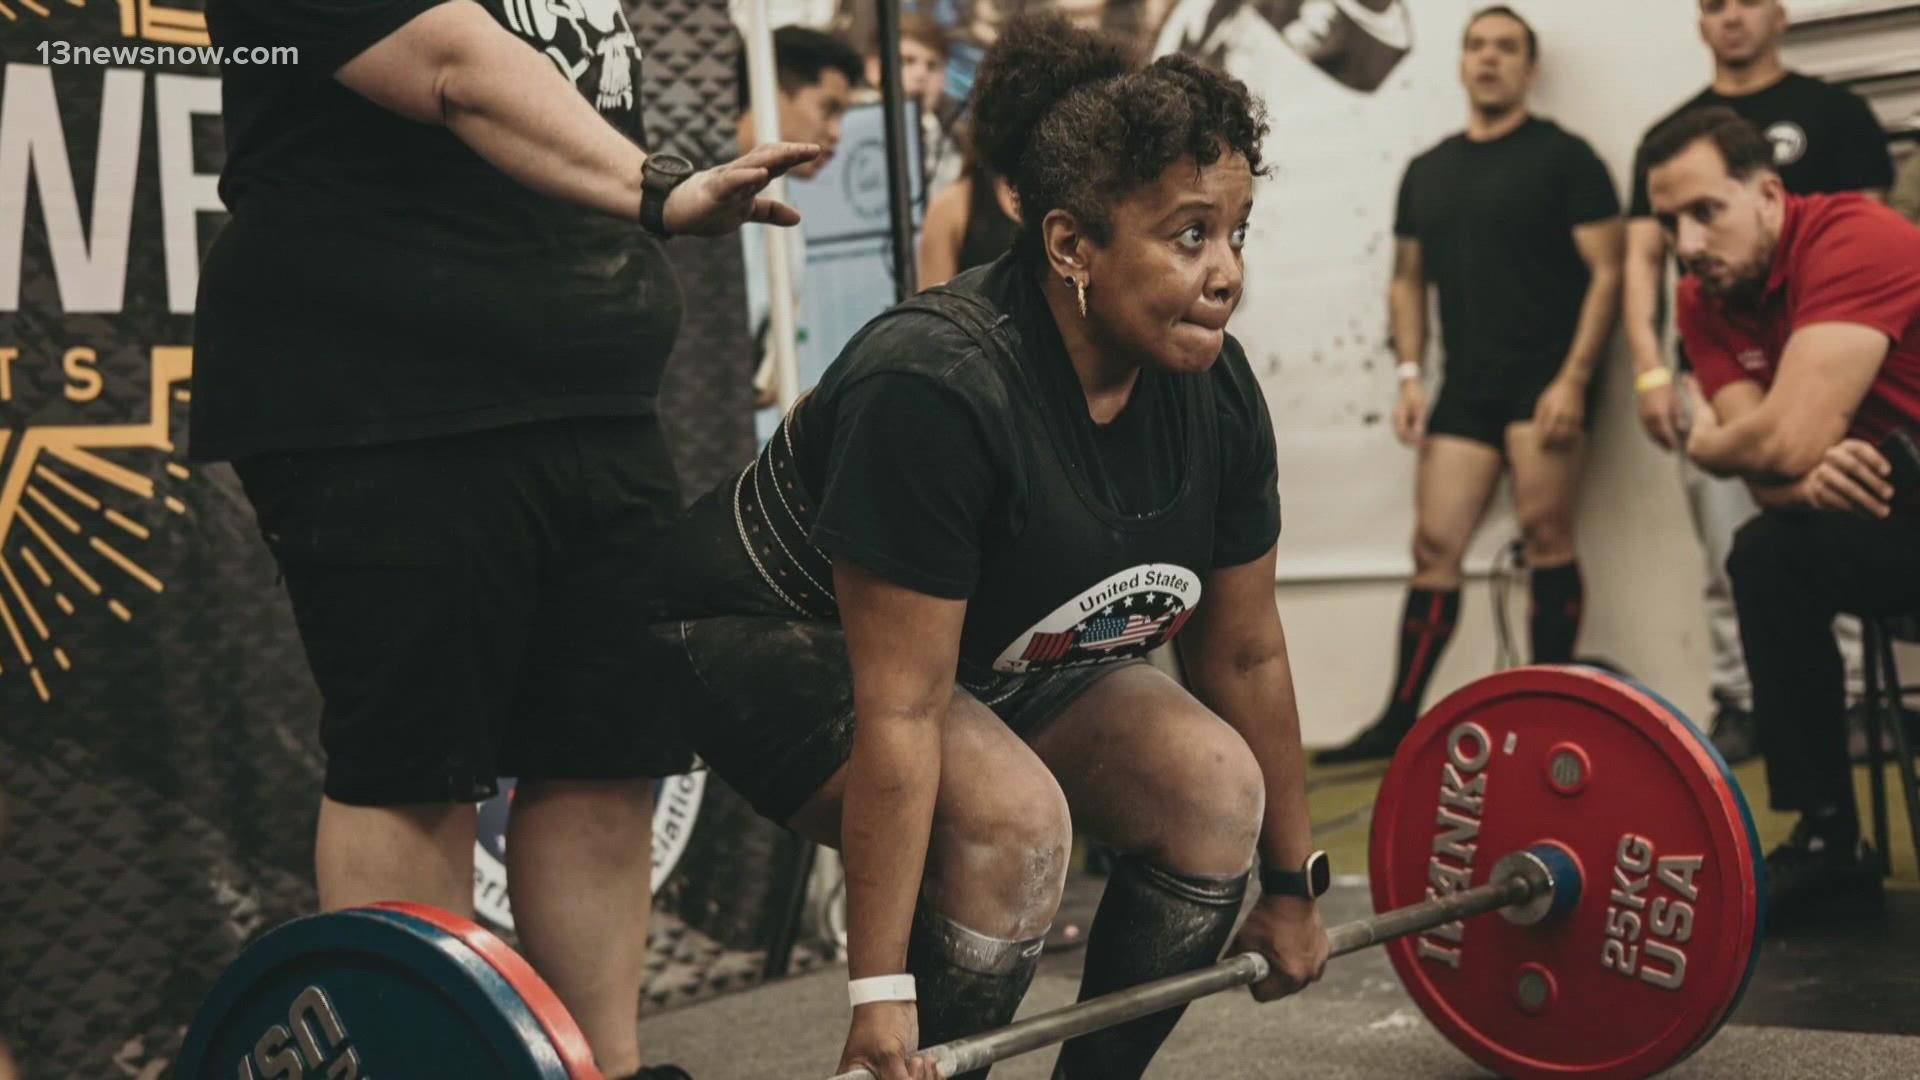 Tracey Mitchell is an administrator at Christopher Newport University for a living, but since 2018, she’s adding competitive powerlifting to her resume.